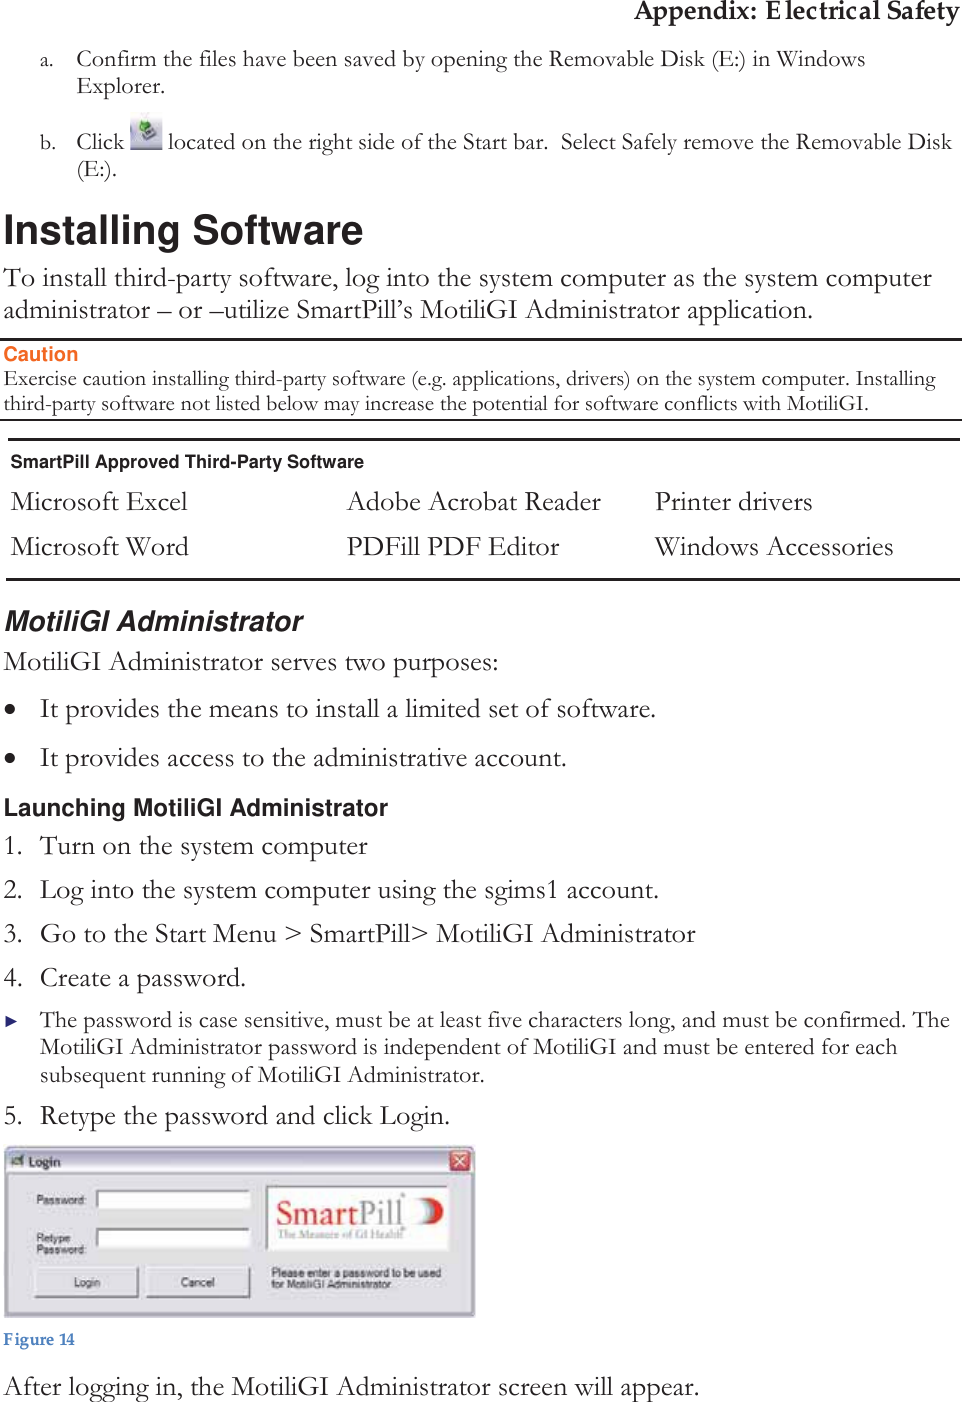 Appendix: Electrical Safety a. Confirm the files have been saved by opening the Removable Disk (E:) in Windows Explorer. b. Click   located on the right side of the Start bar.  Select Safely remove the Removable Disk (E:). Installing Software To install third-party software, log into the system computer as the system computer administrator – or –utilize SmartPill’s MotiliGI Administrator application. Caution Exercise caution installing third-party software (e.g. applications, drivers) on the system computer. Installing third-party software not listed below may increase the potential for software conflicts with MotiliGI. SmartPill Approved Third-Party Software Microsoft Excel Microsoft Word Adobe Acrobat Reader PDFill PDF Editor Printer drivers Windows Accessories MotiliGI Administrator MotiliGI Administrator serves two purposes: xIt provides the means to install a limited set of software.   xIt provides access to the administrative account. Launching MotiliGI Administrator 1. Turn on the system computer 2. Log into the system computer using the sgims1 account.  3. Go to the Start Menu &gt; SmartPill&gt; MotiliGI Administrator 4. Create a password.  ►The password is case sensitive, must be at least five characters long, and must be confirmed. The MotiliGI Administrator password is independent of MotiliGI and must be entered for each subsequent running of MotiliGI Administrator.  5. Retype the password and click Login.  Figure 14 After logging in, the MotiliGI Administrator screen will appear. 